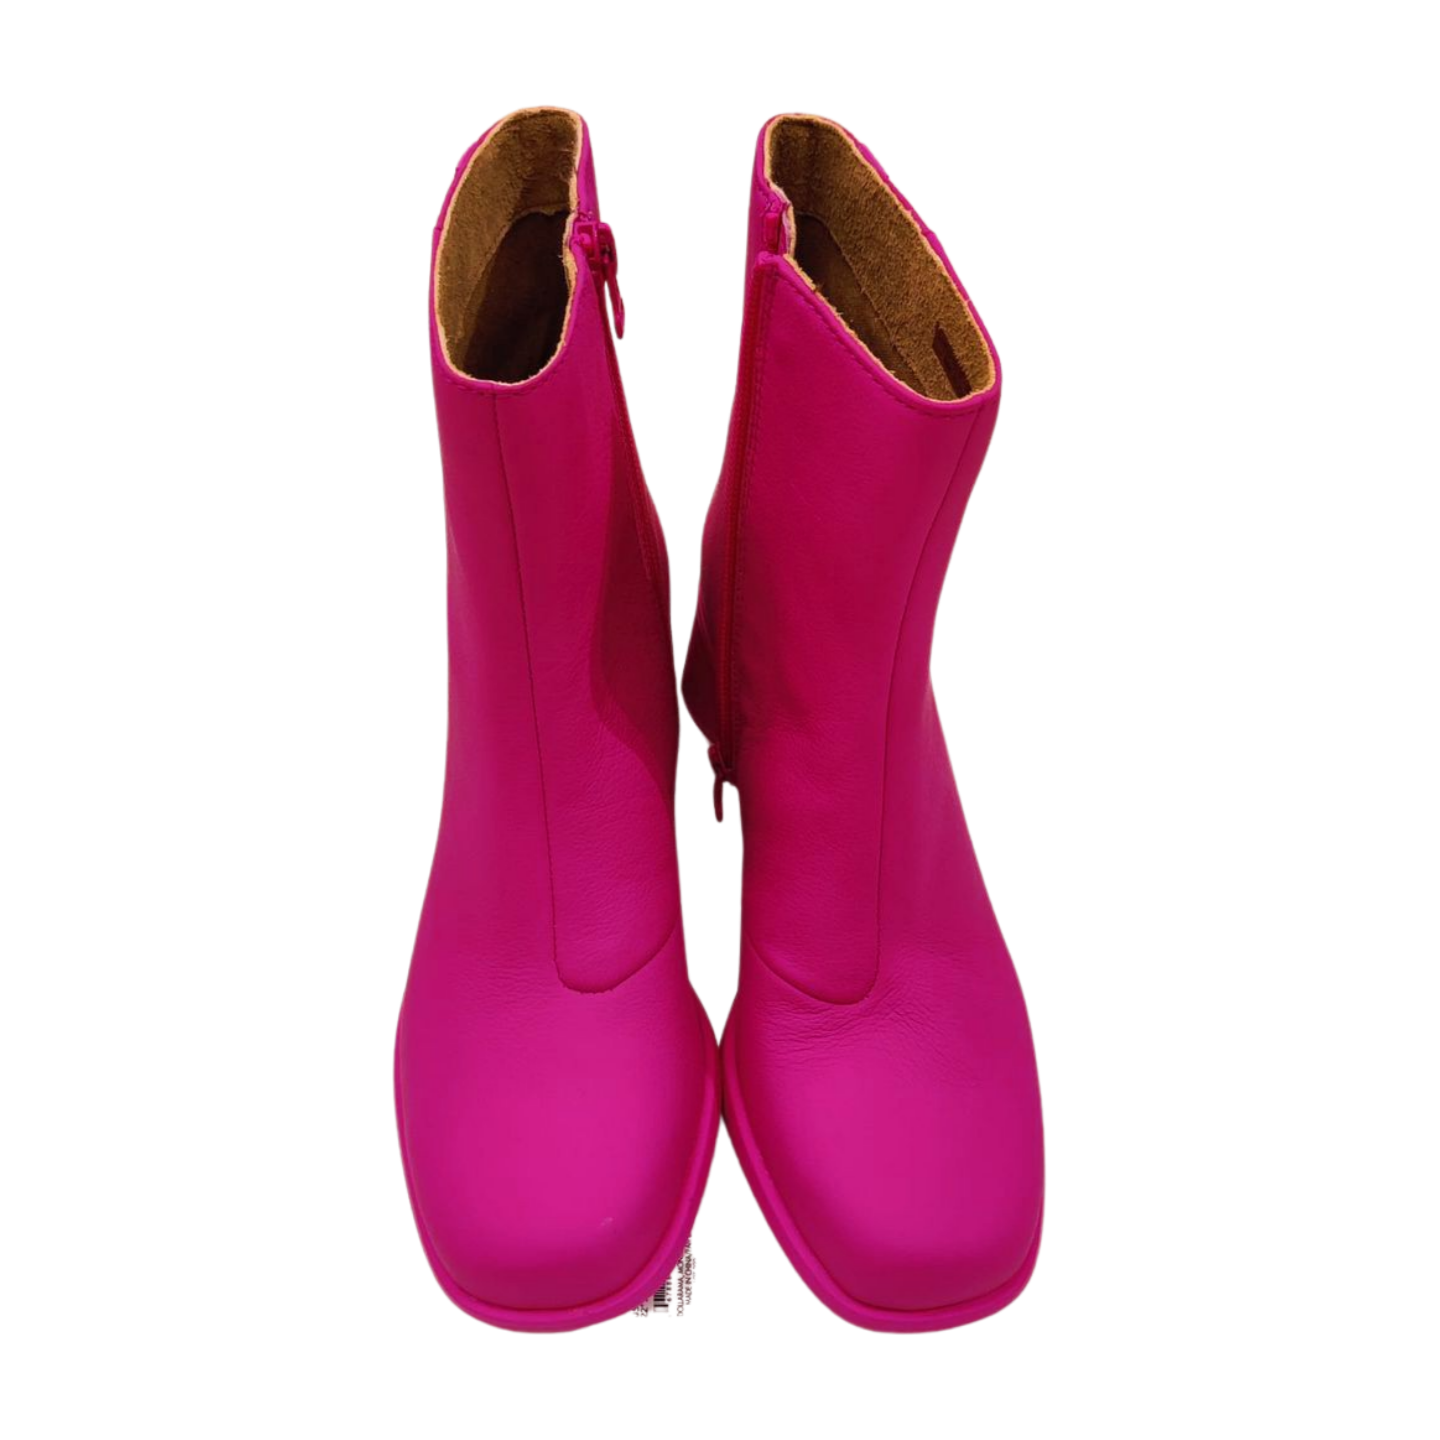 Camper Kiara Pink Leather Ankle Boots